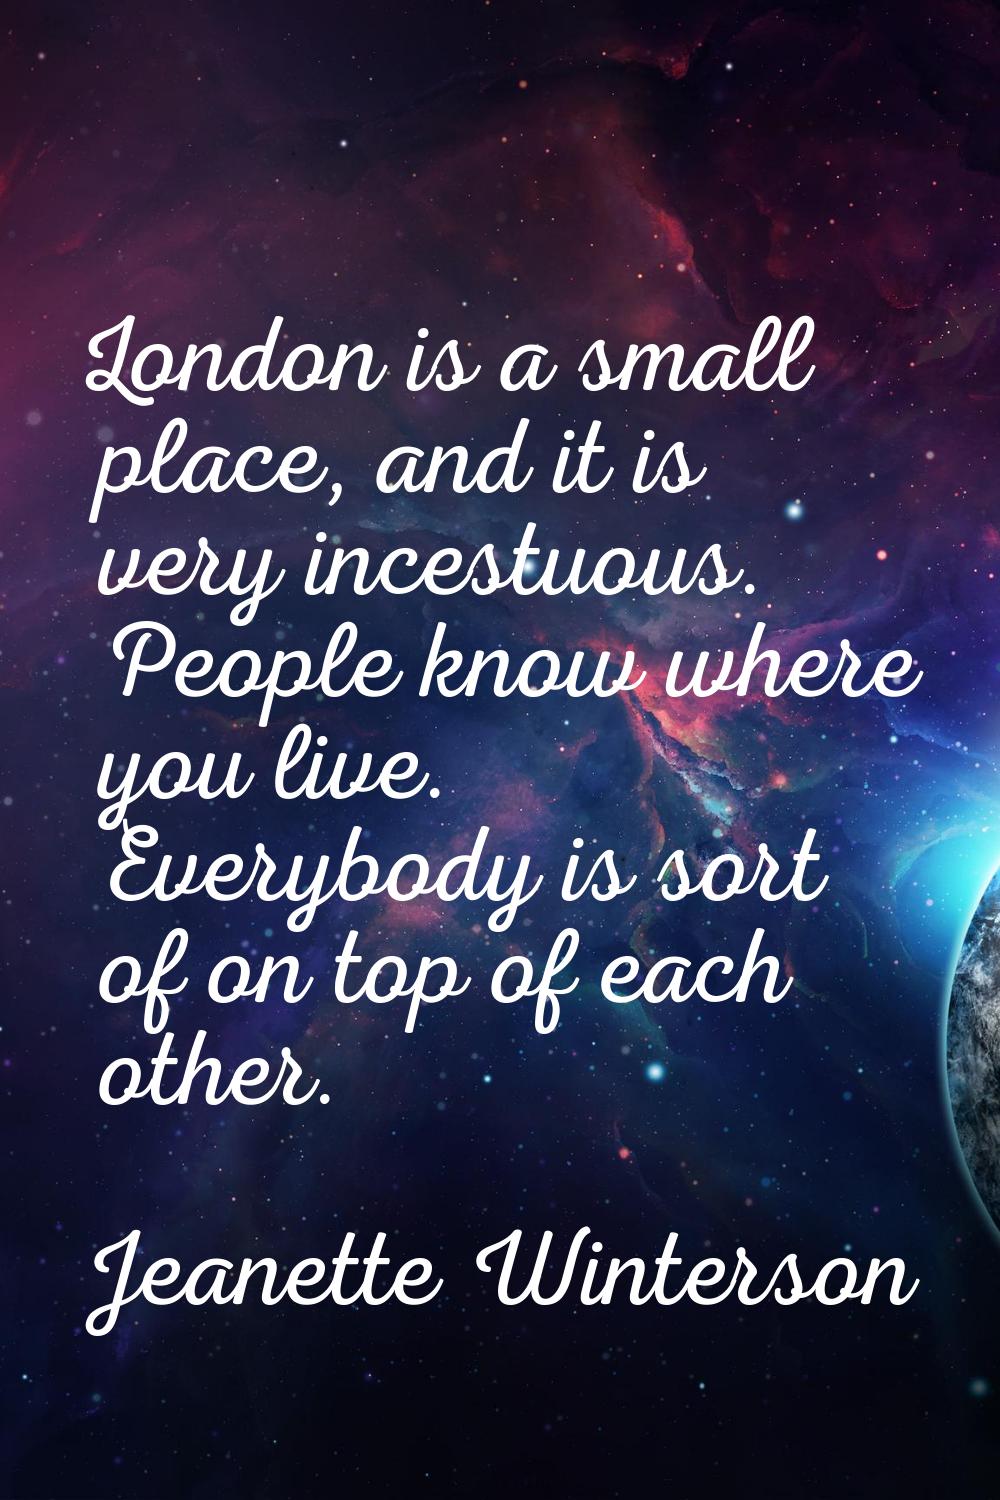 London is a small place, and it is very incestuous. People know where you live. Everybody is sort o